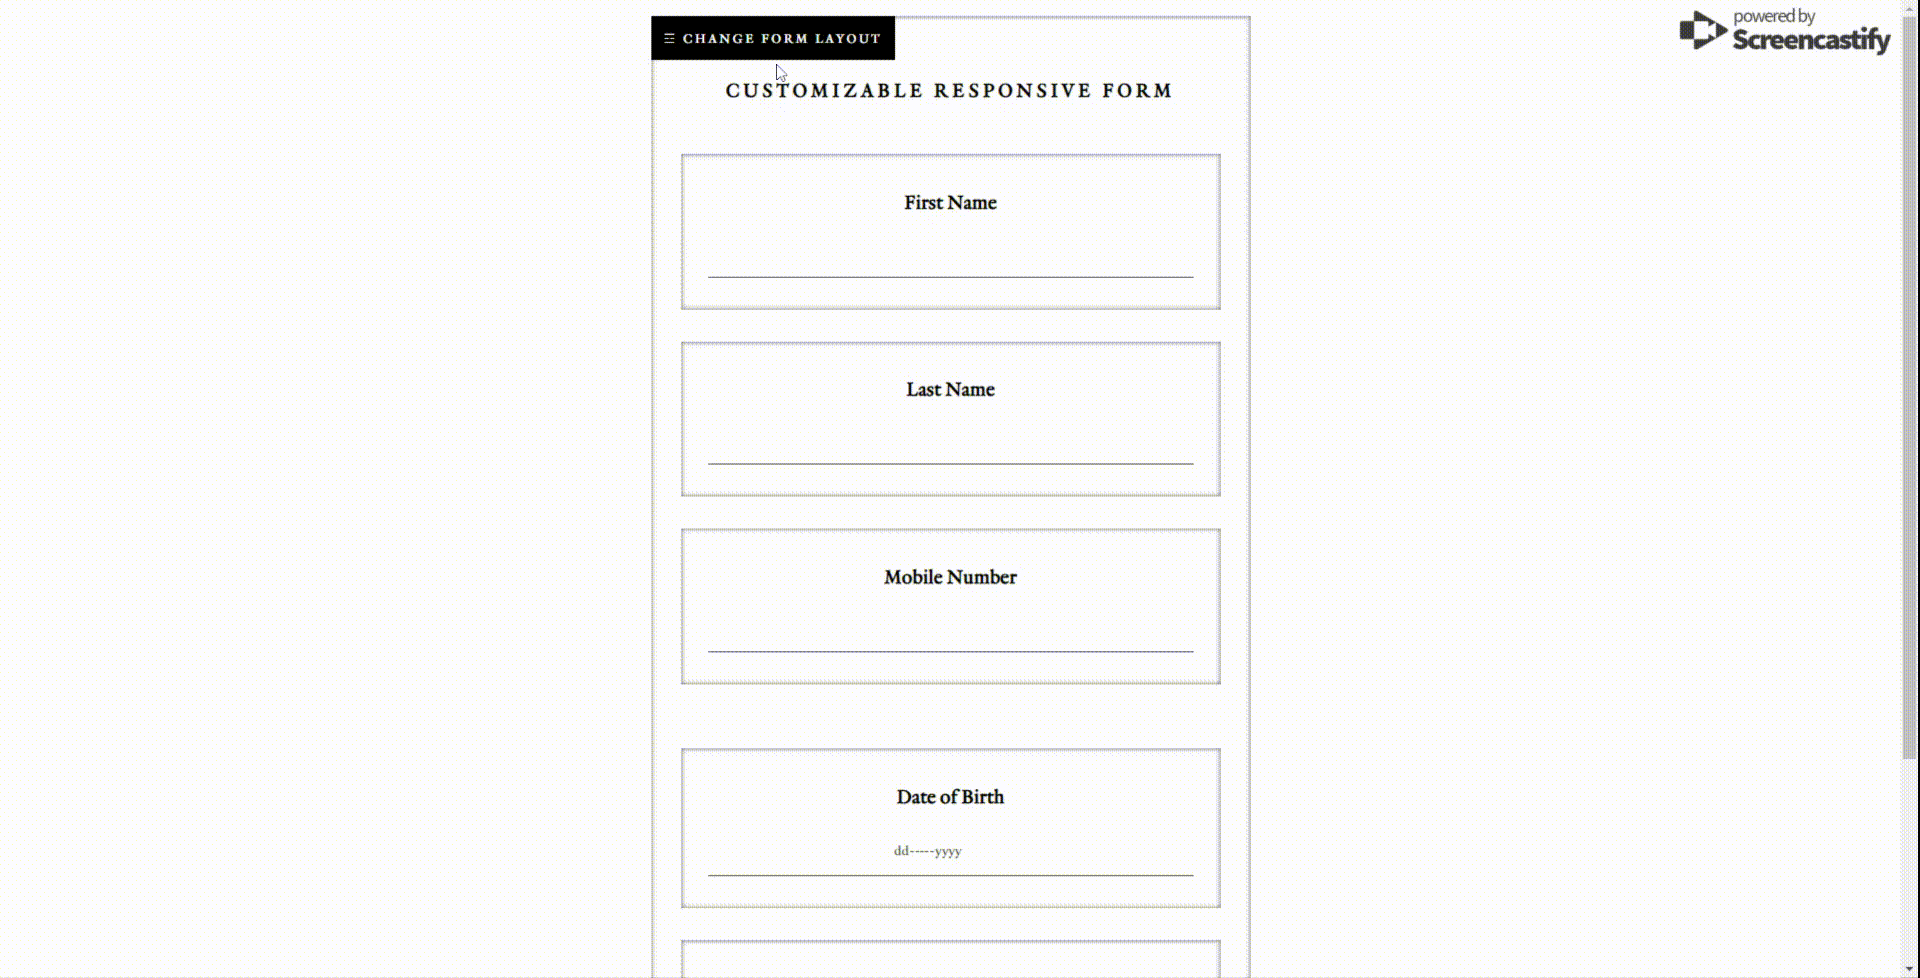 Customizable and Responsive Form Layout